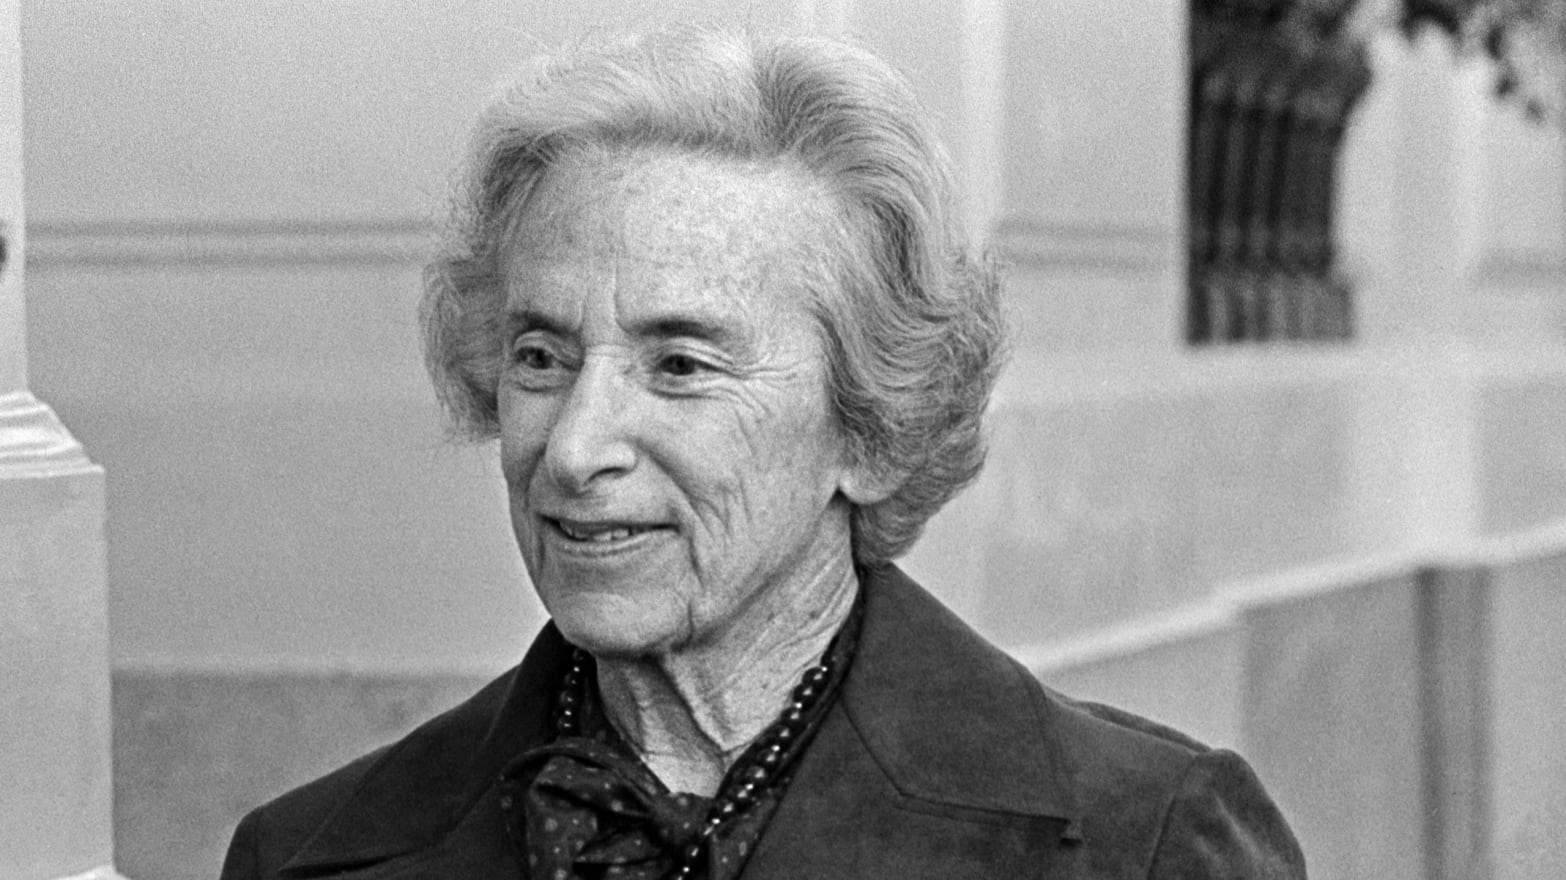 16 Astounding Facts About Barbara Tuchman - Facts.net